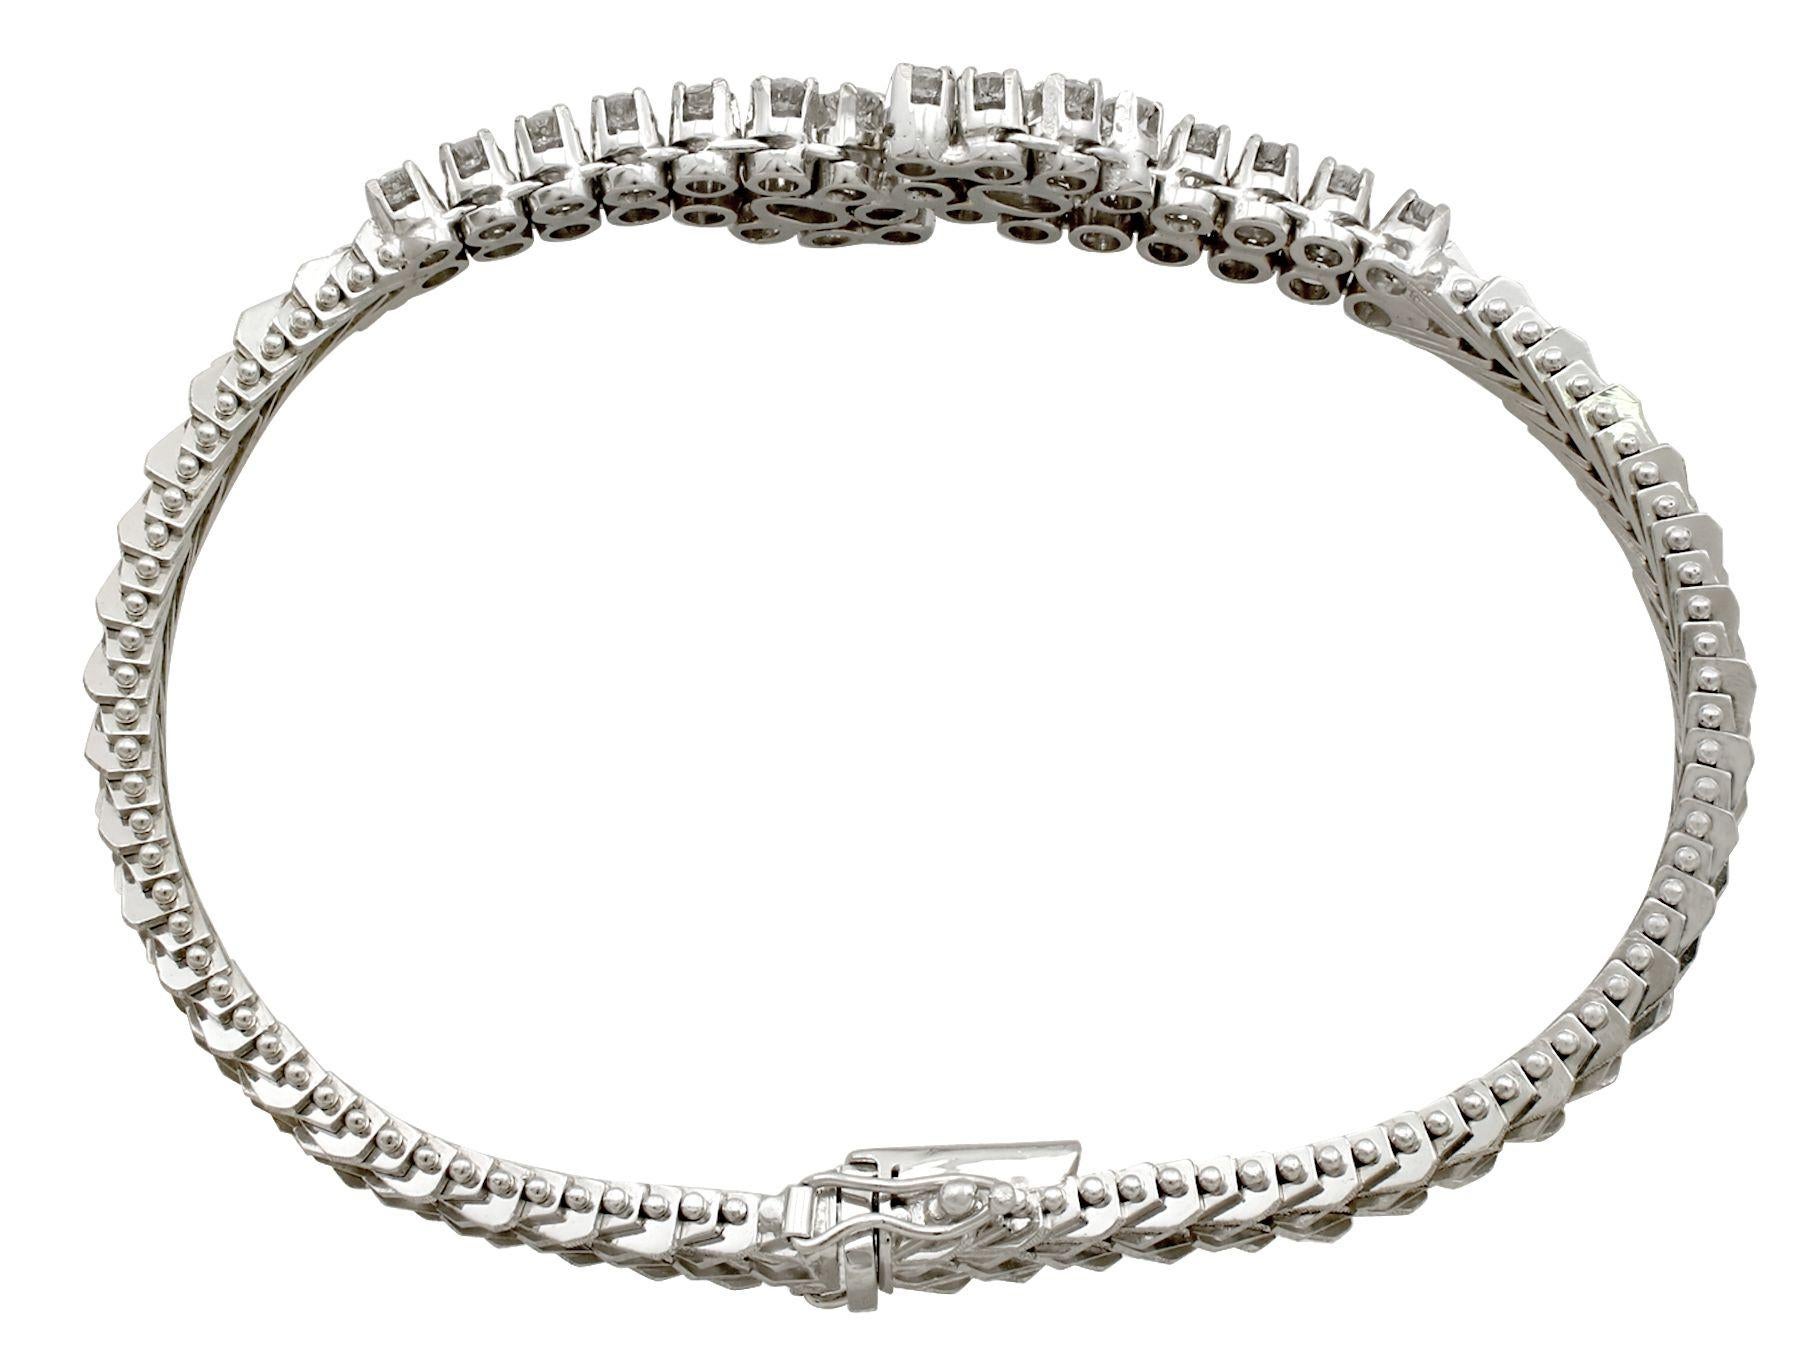 An impressive vintage Italian 2.36 carat diamond and 18k white gold bracelet by Chimento; part of our diverse diamond jewelry and estate jewelry collections

This fine and impressive vintage diamond bracelet has been crafted in 18k white gold.

The